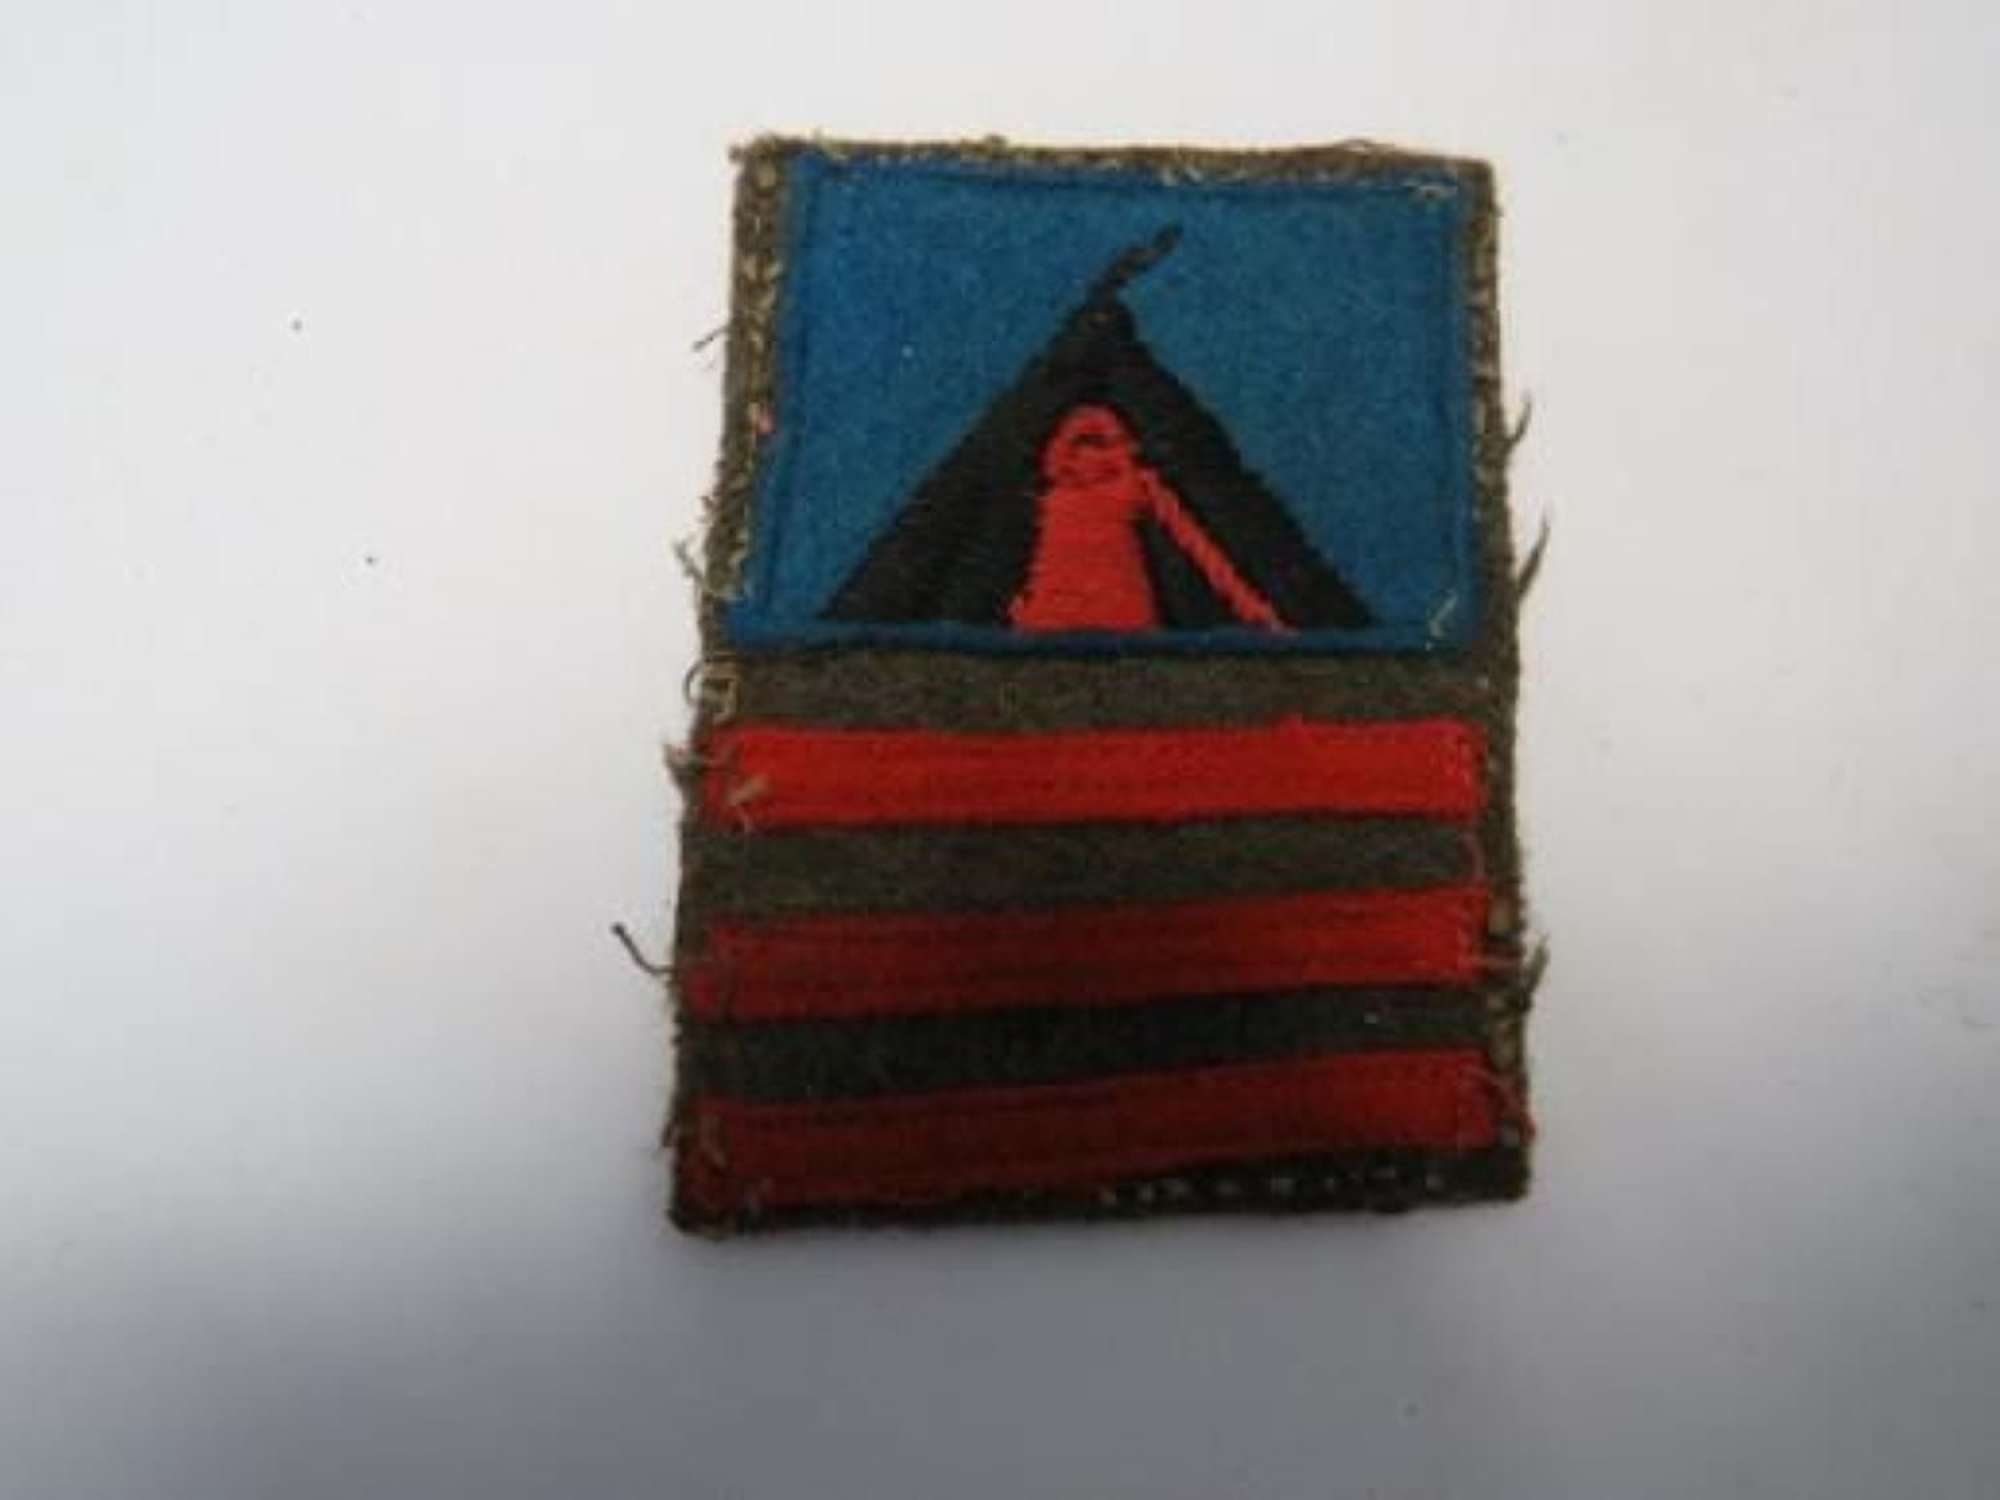 59th Staffordshire Infantry Division Battle Badge